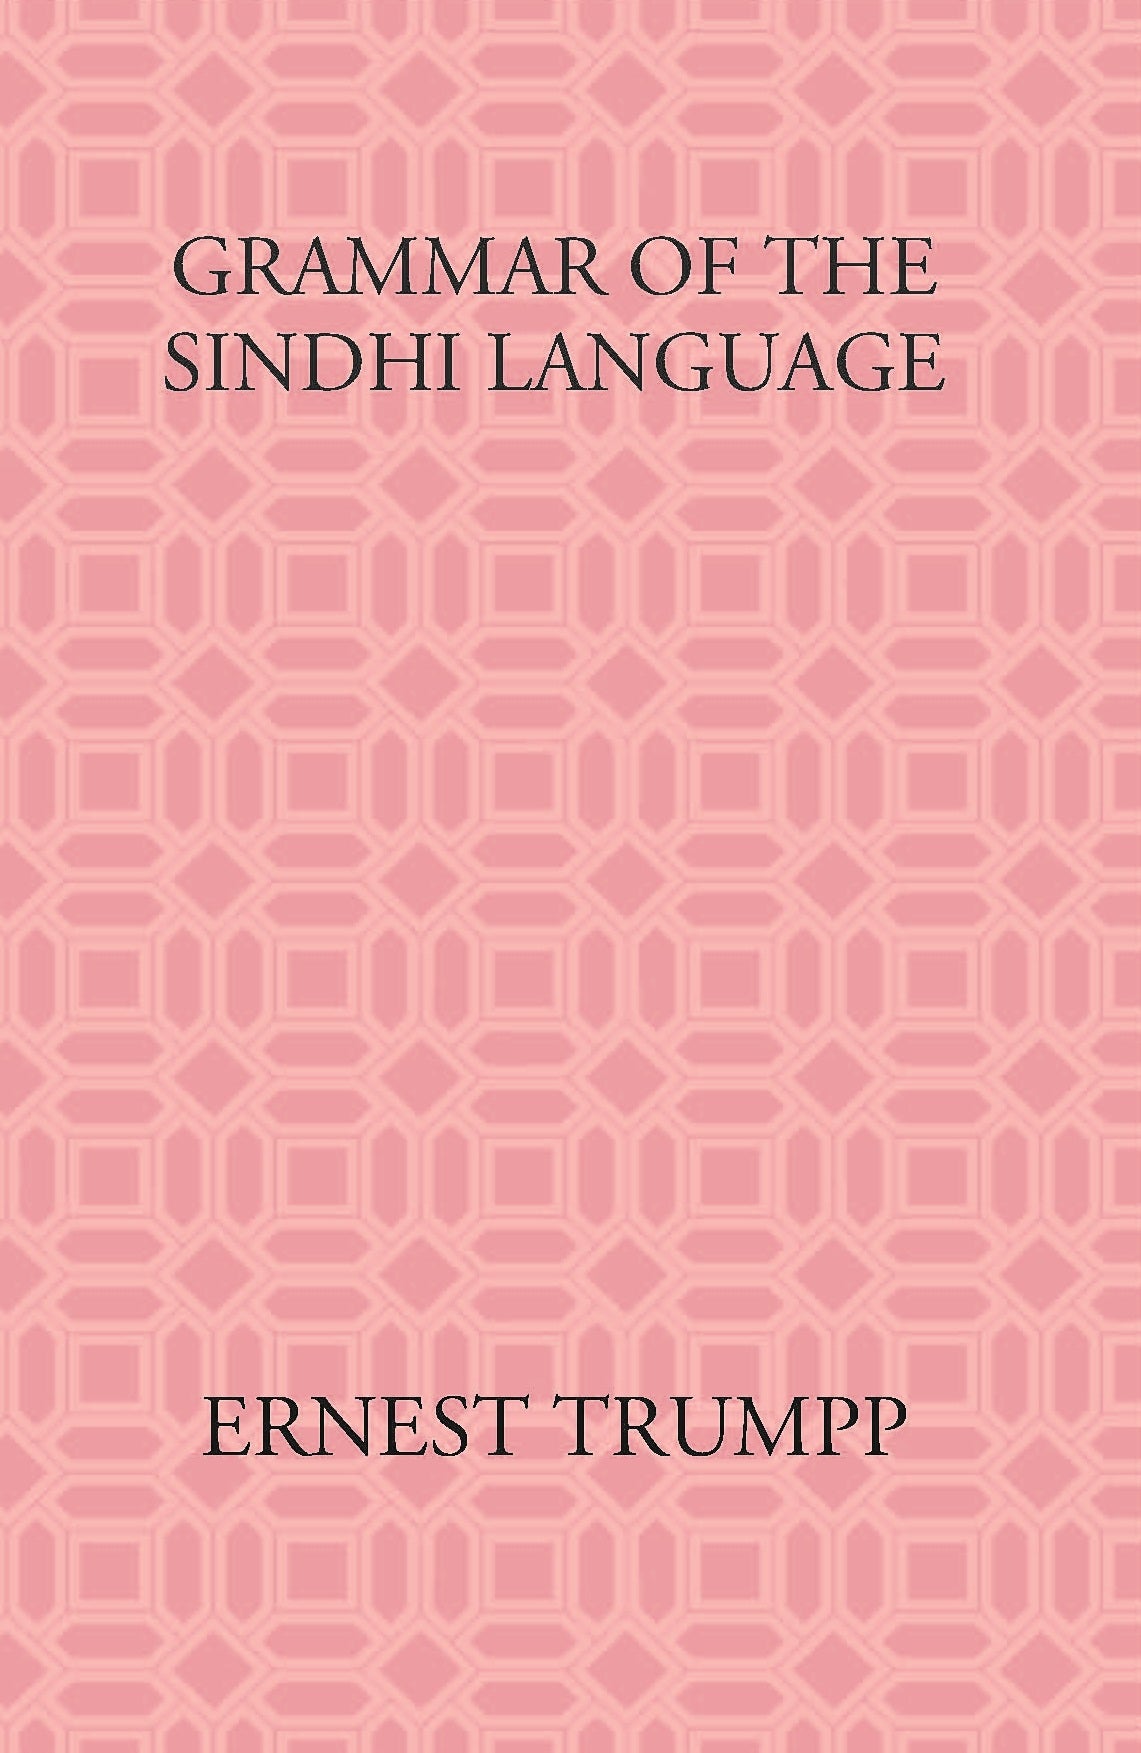 Grammar Of The Sindhi Language: Compared With The Sanskrit-Prakrit And The Cognate Indian Vernaculars